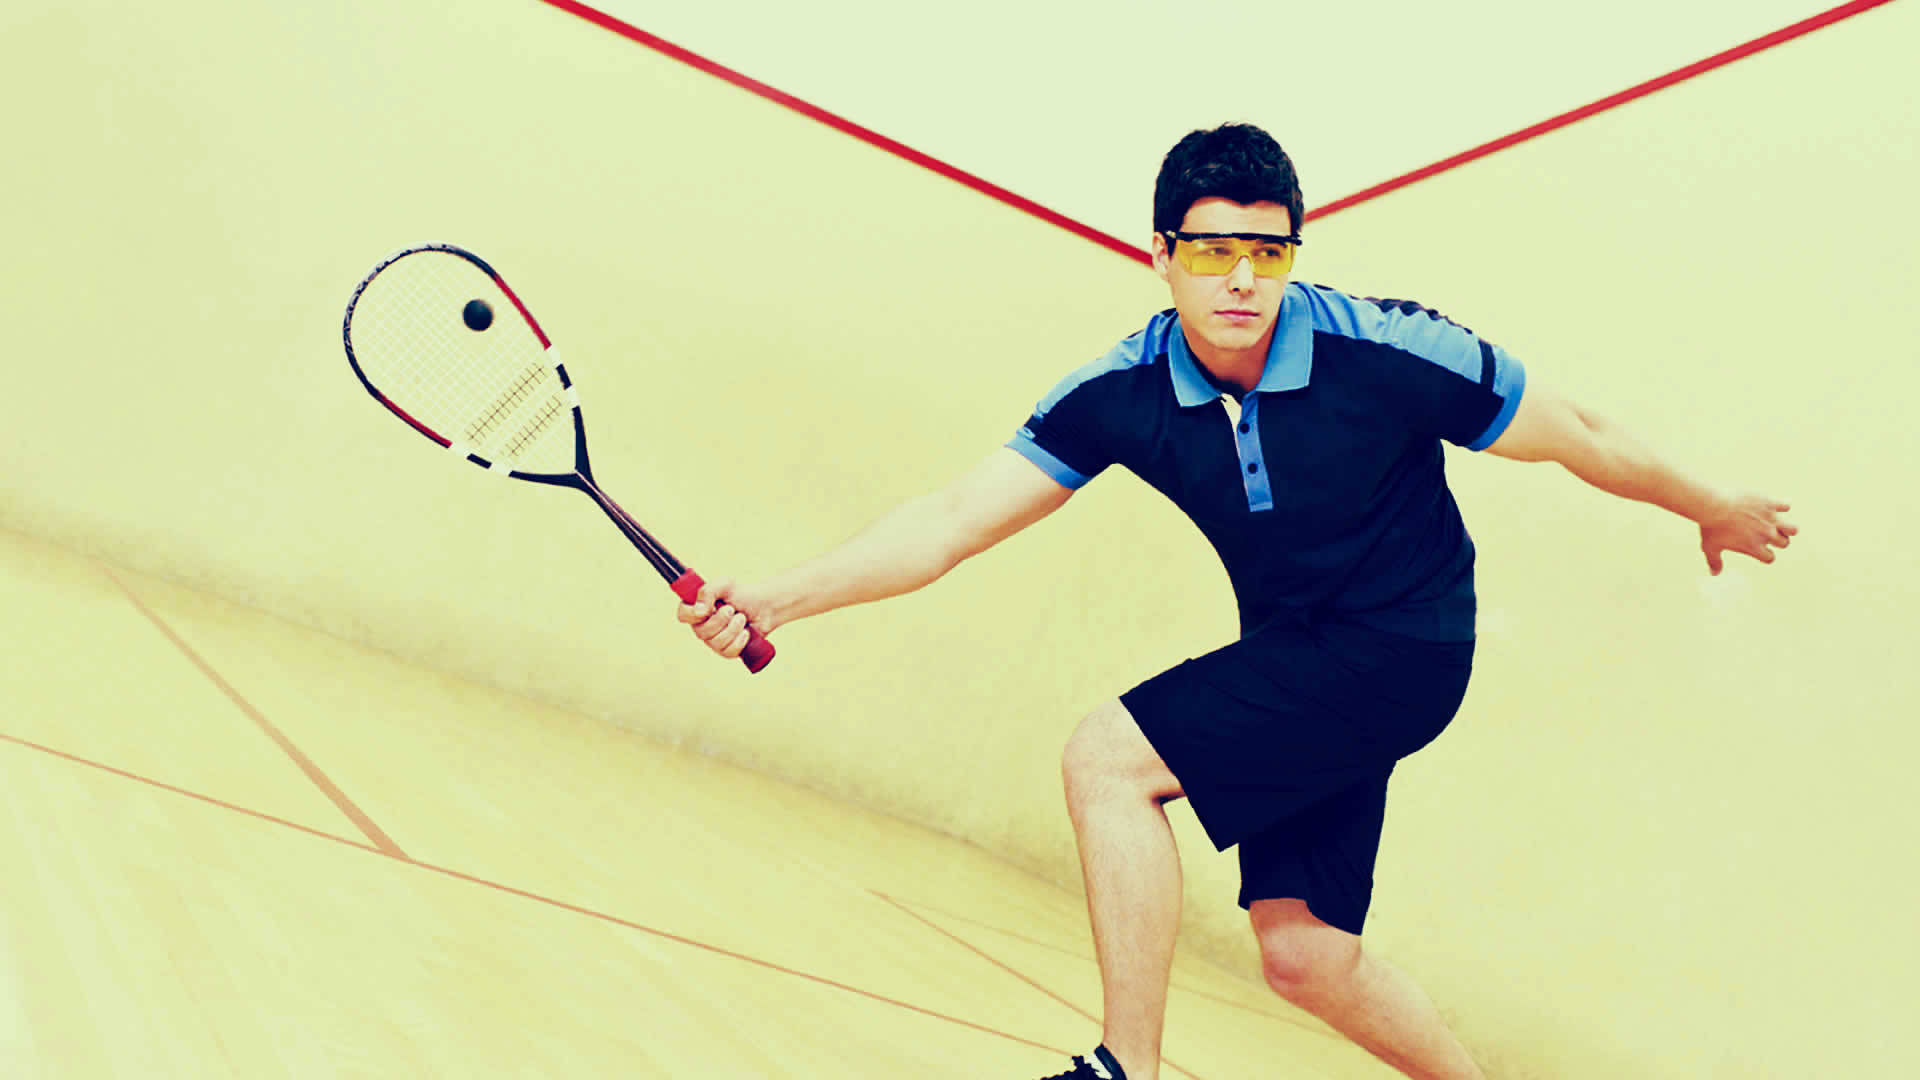 Man With Yellow Goggles Playing Squash Background